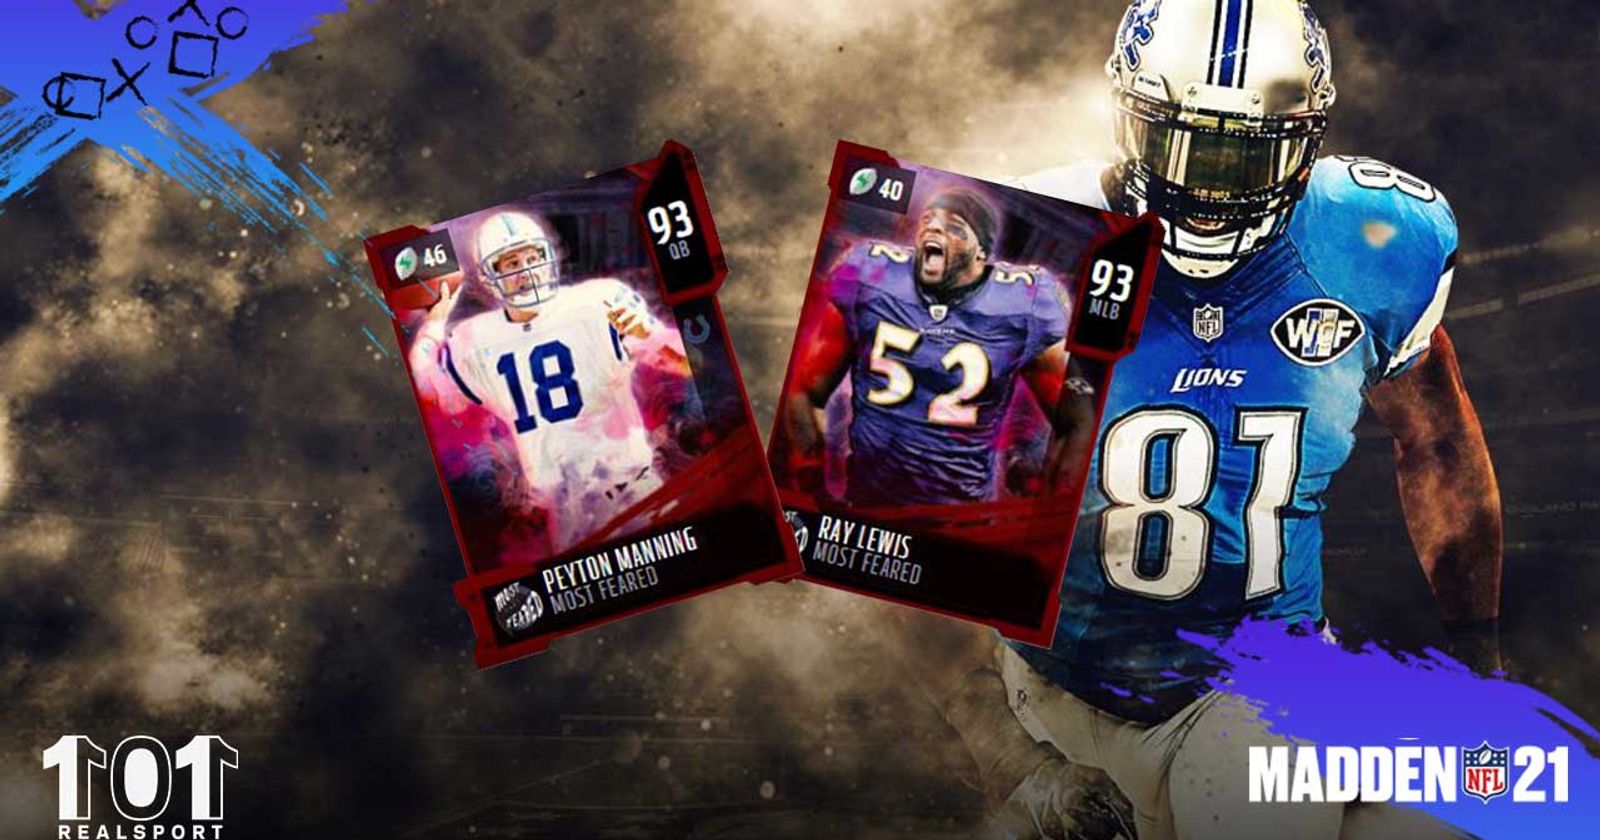 MOST FEARED PROMO, SEASON 2, AP UPDATES, AND SO MUCH MORE!